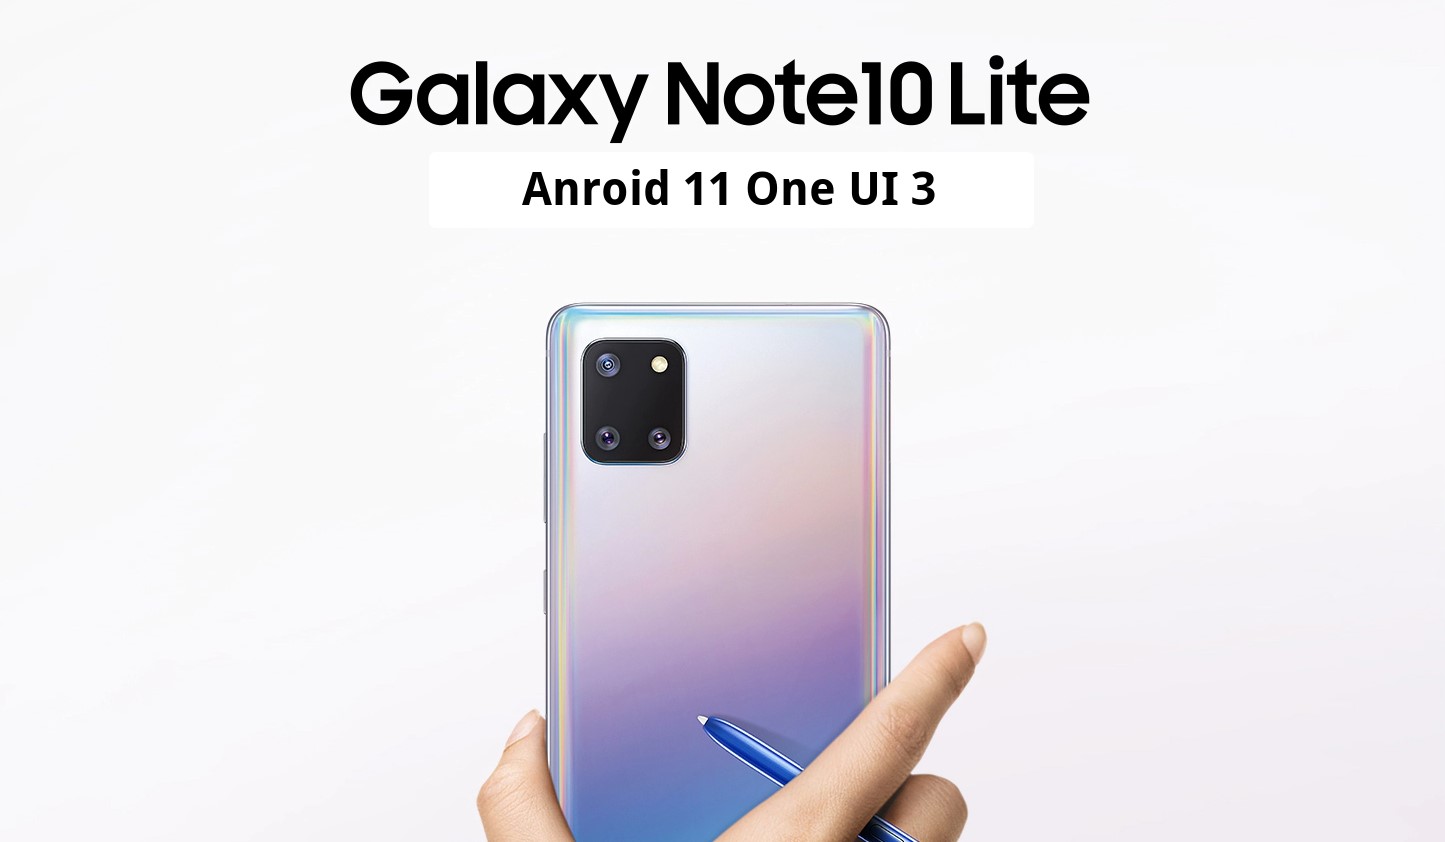 Samsung Galaxy Note10 Lite Android 11 One UI 3